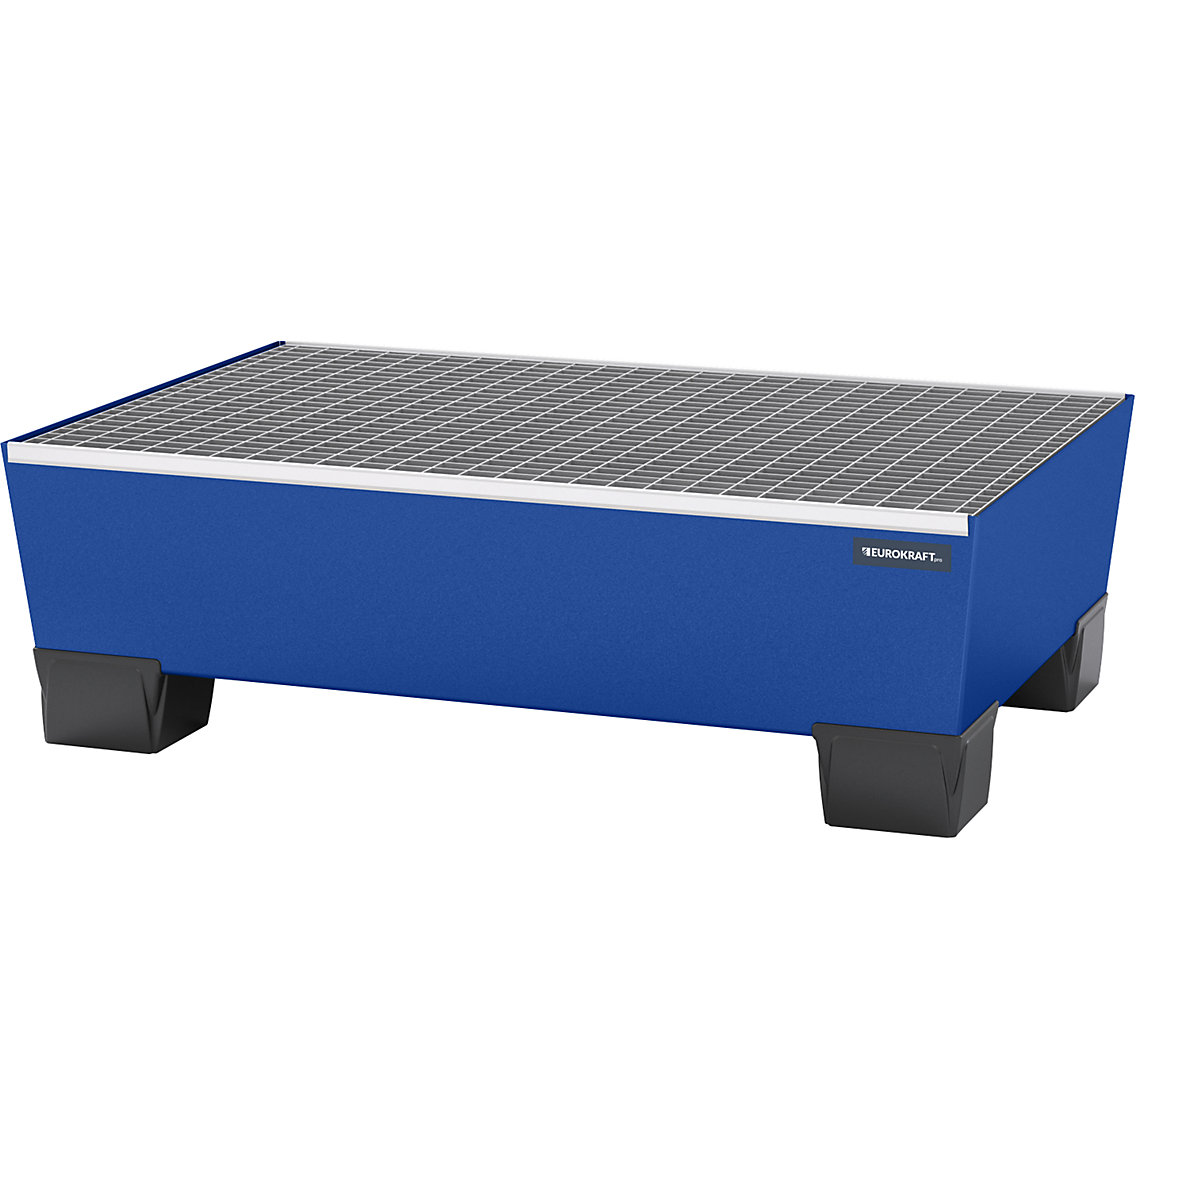 Steel sump tray with plastic feet – eurokraft pro, LxWxH 1240 x 815 x 360 mm, blue, with grate-4